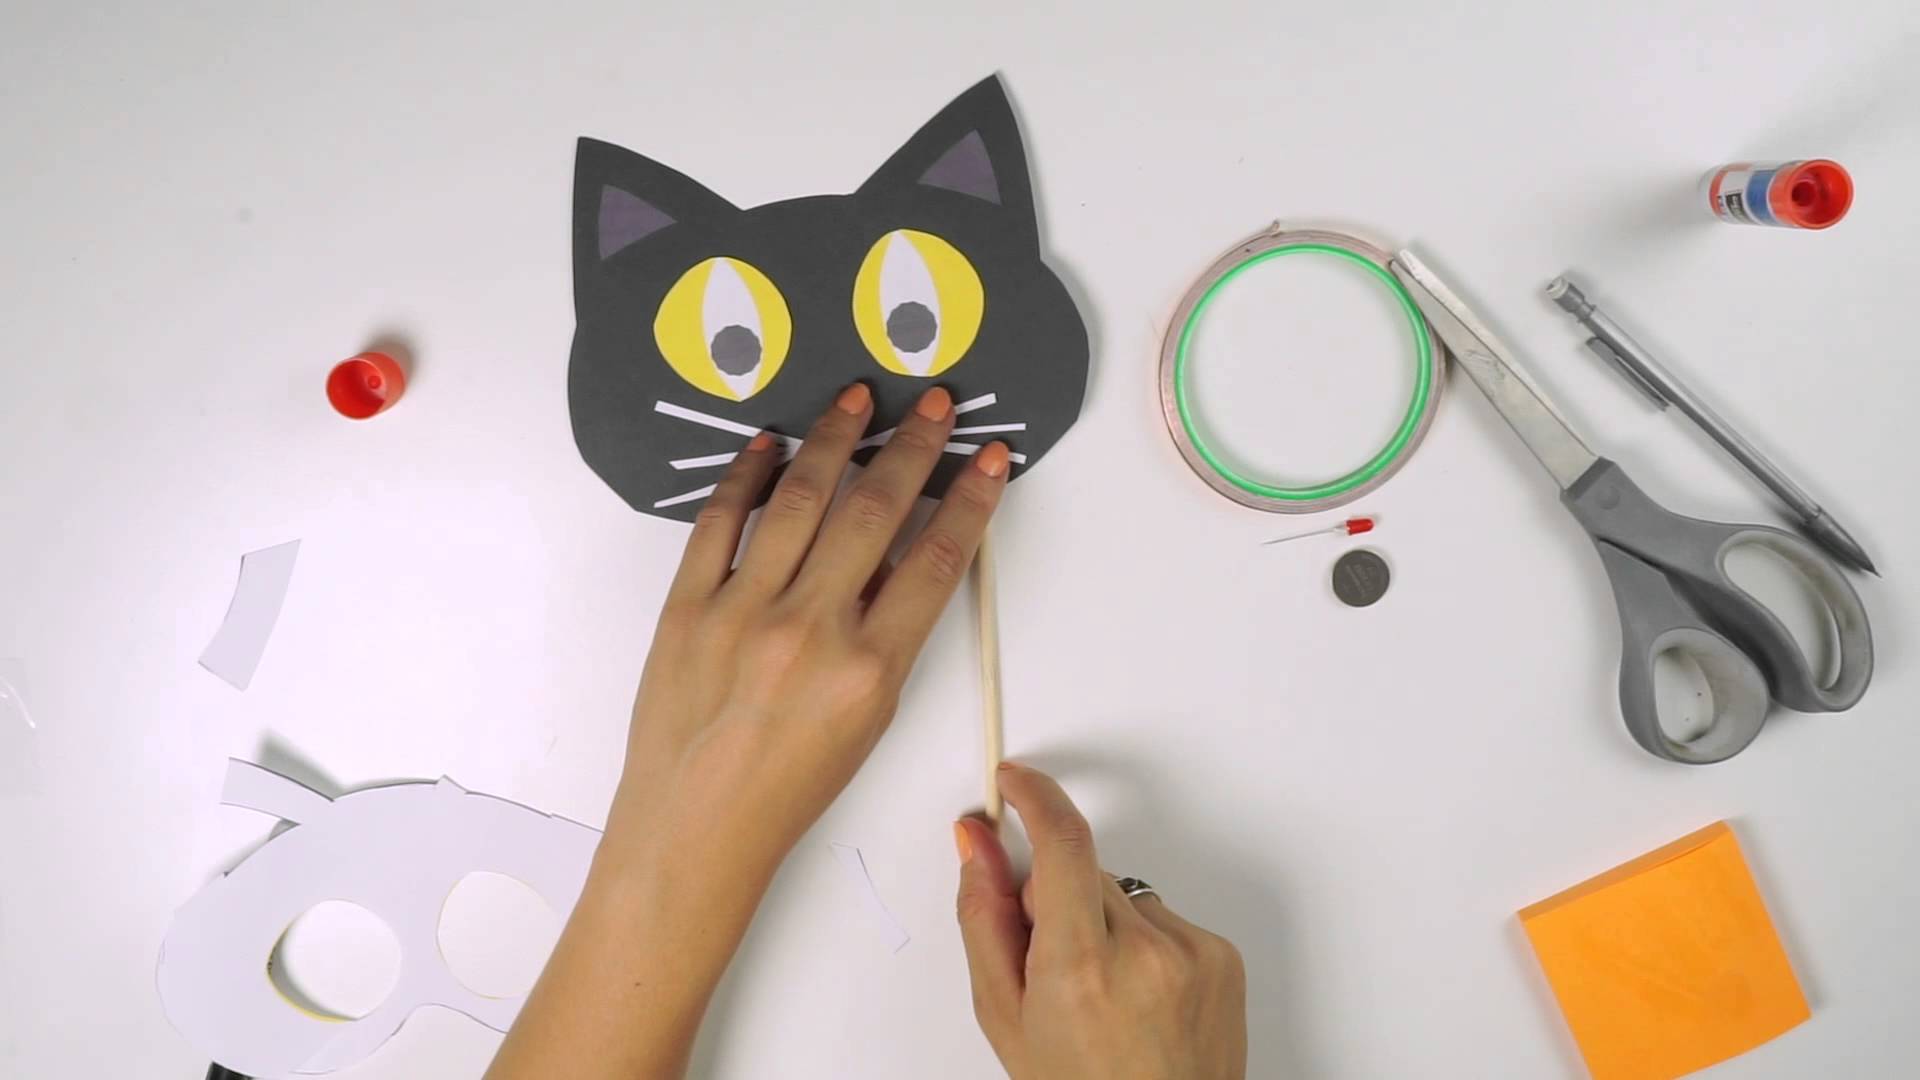 Paper Circuit: Light Up Cat Mask - YouTube